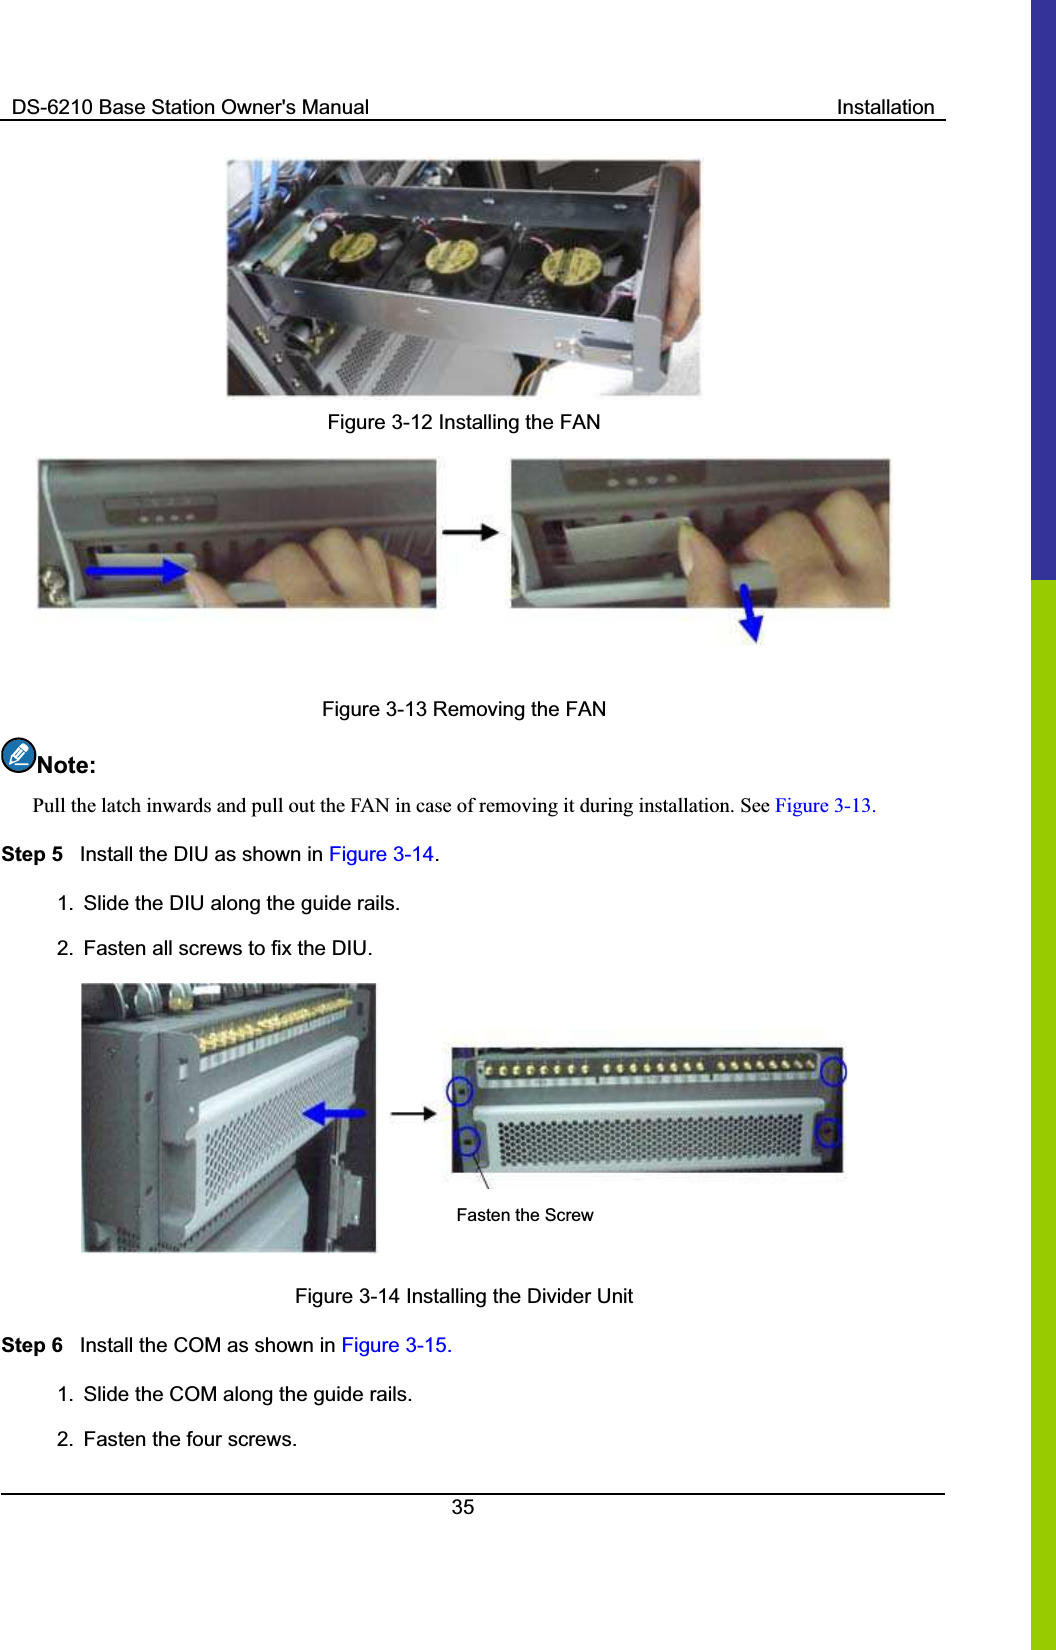 DS-6210 Base Station Owner&apos;s Manual  Installation35Figure 3-12 Installing the FAN Figure 3-13 Removing the FAN Note:Pull the latch inwards and pull out the FAN in case of removing it during installation. See Figure 3-13. Step 5  Install the DIU as shown in Figure 3-14.1.  Slide the DIU along the guide rails.   2.  Fasten all screws to fix the DIU.   Fasten the ScrewFigure 3-14 Installing the Divider Unit Step 6  Install the COM as shown in Figure 3-15. 1.  Slide the COM along the guide rails.     2.  Fasten the four screws.   